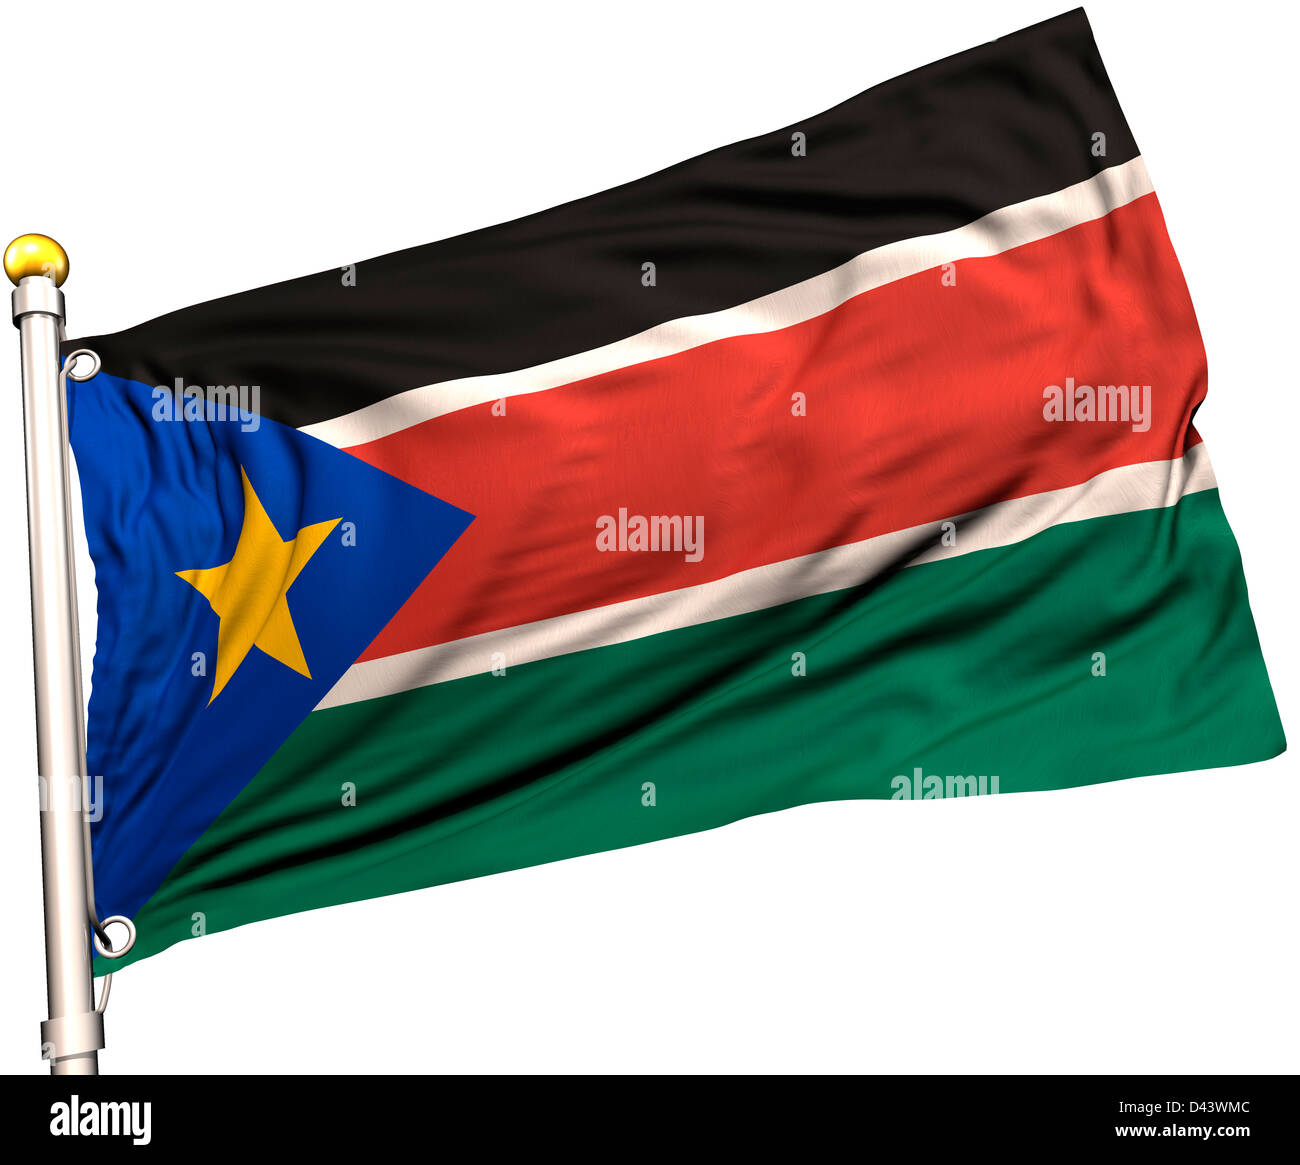 South Sudan flag on a flag pole. Clipping path included. Silk texture visible on the flag at 100%. Stock Photo